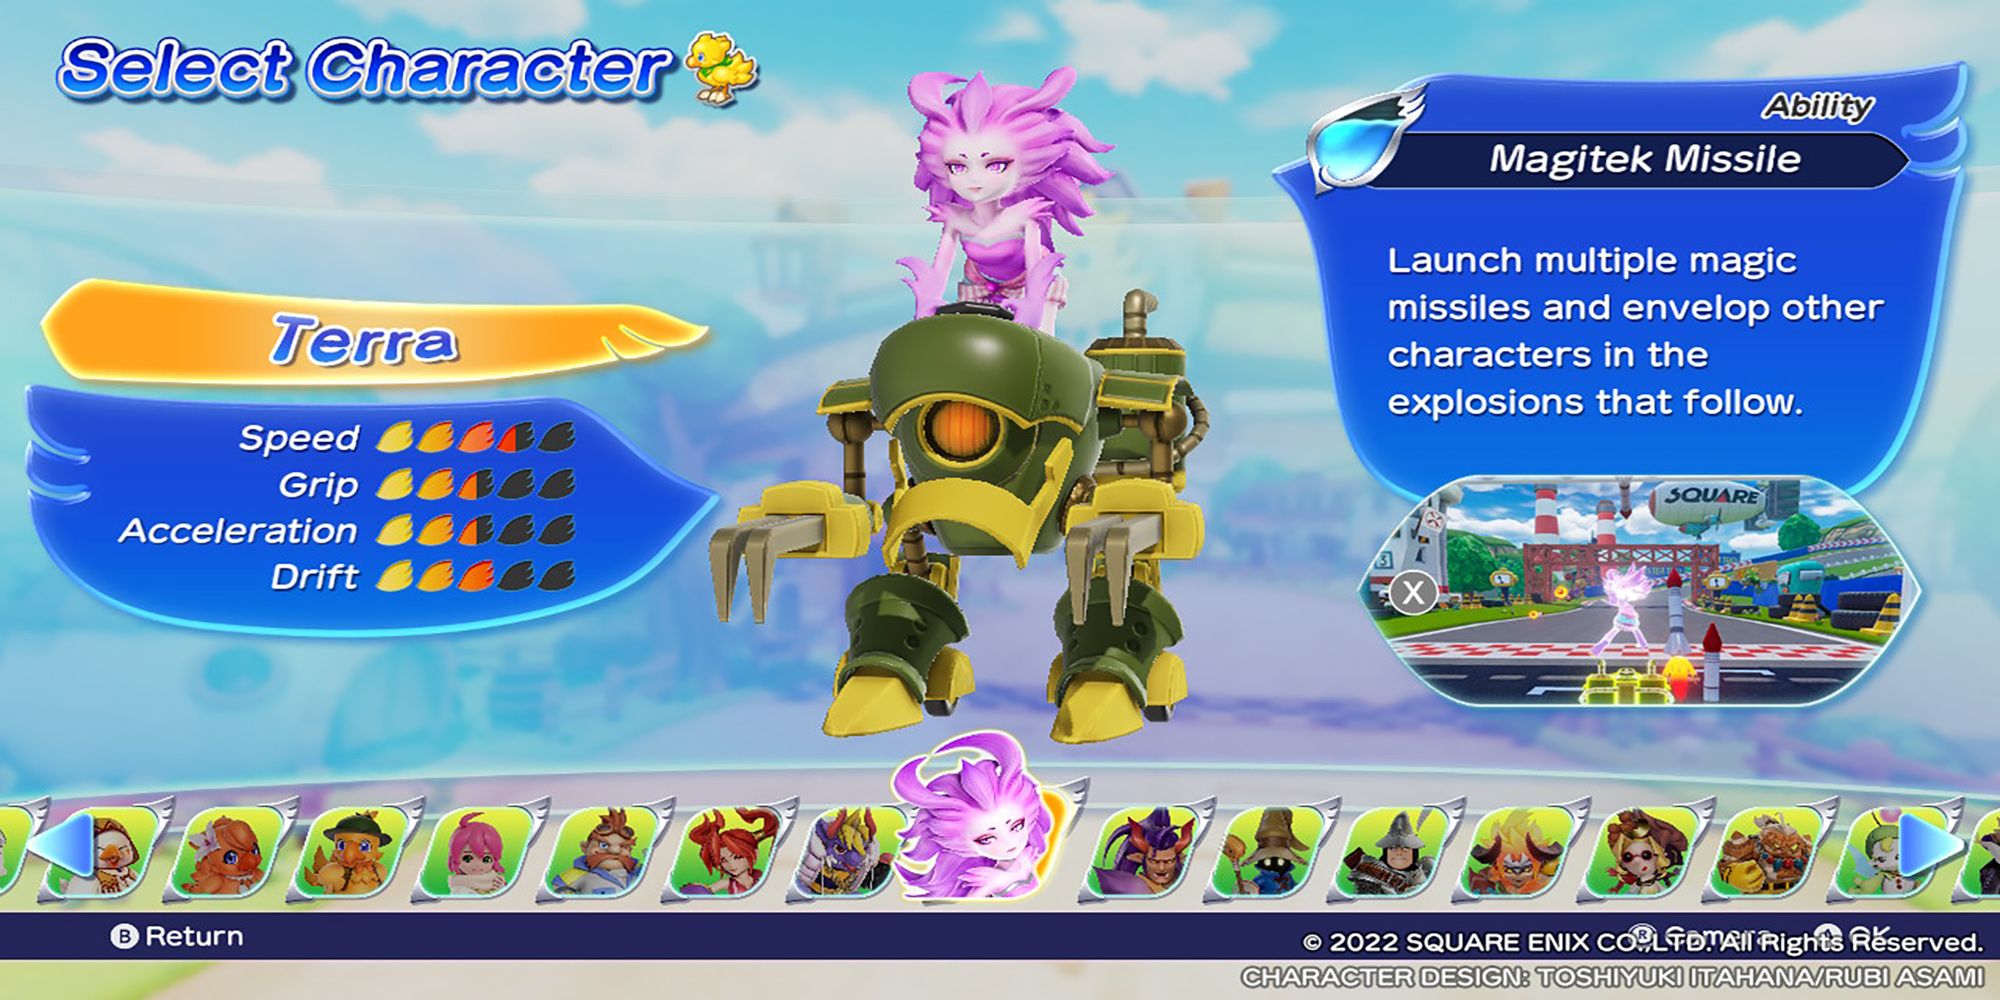 Terra's character model, along with her stats and abilities, in the Select Character menu. Chocobo GP.